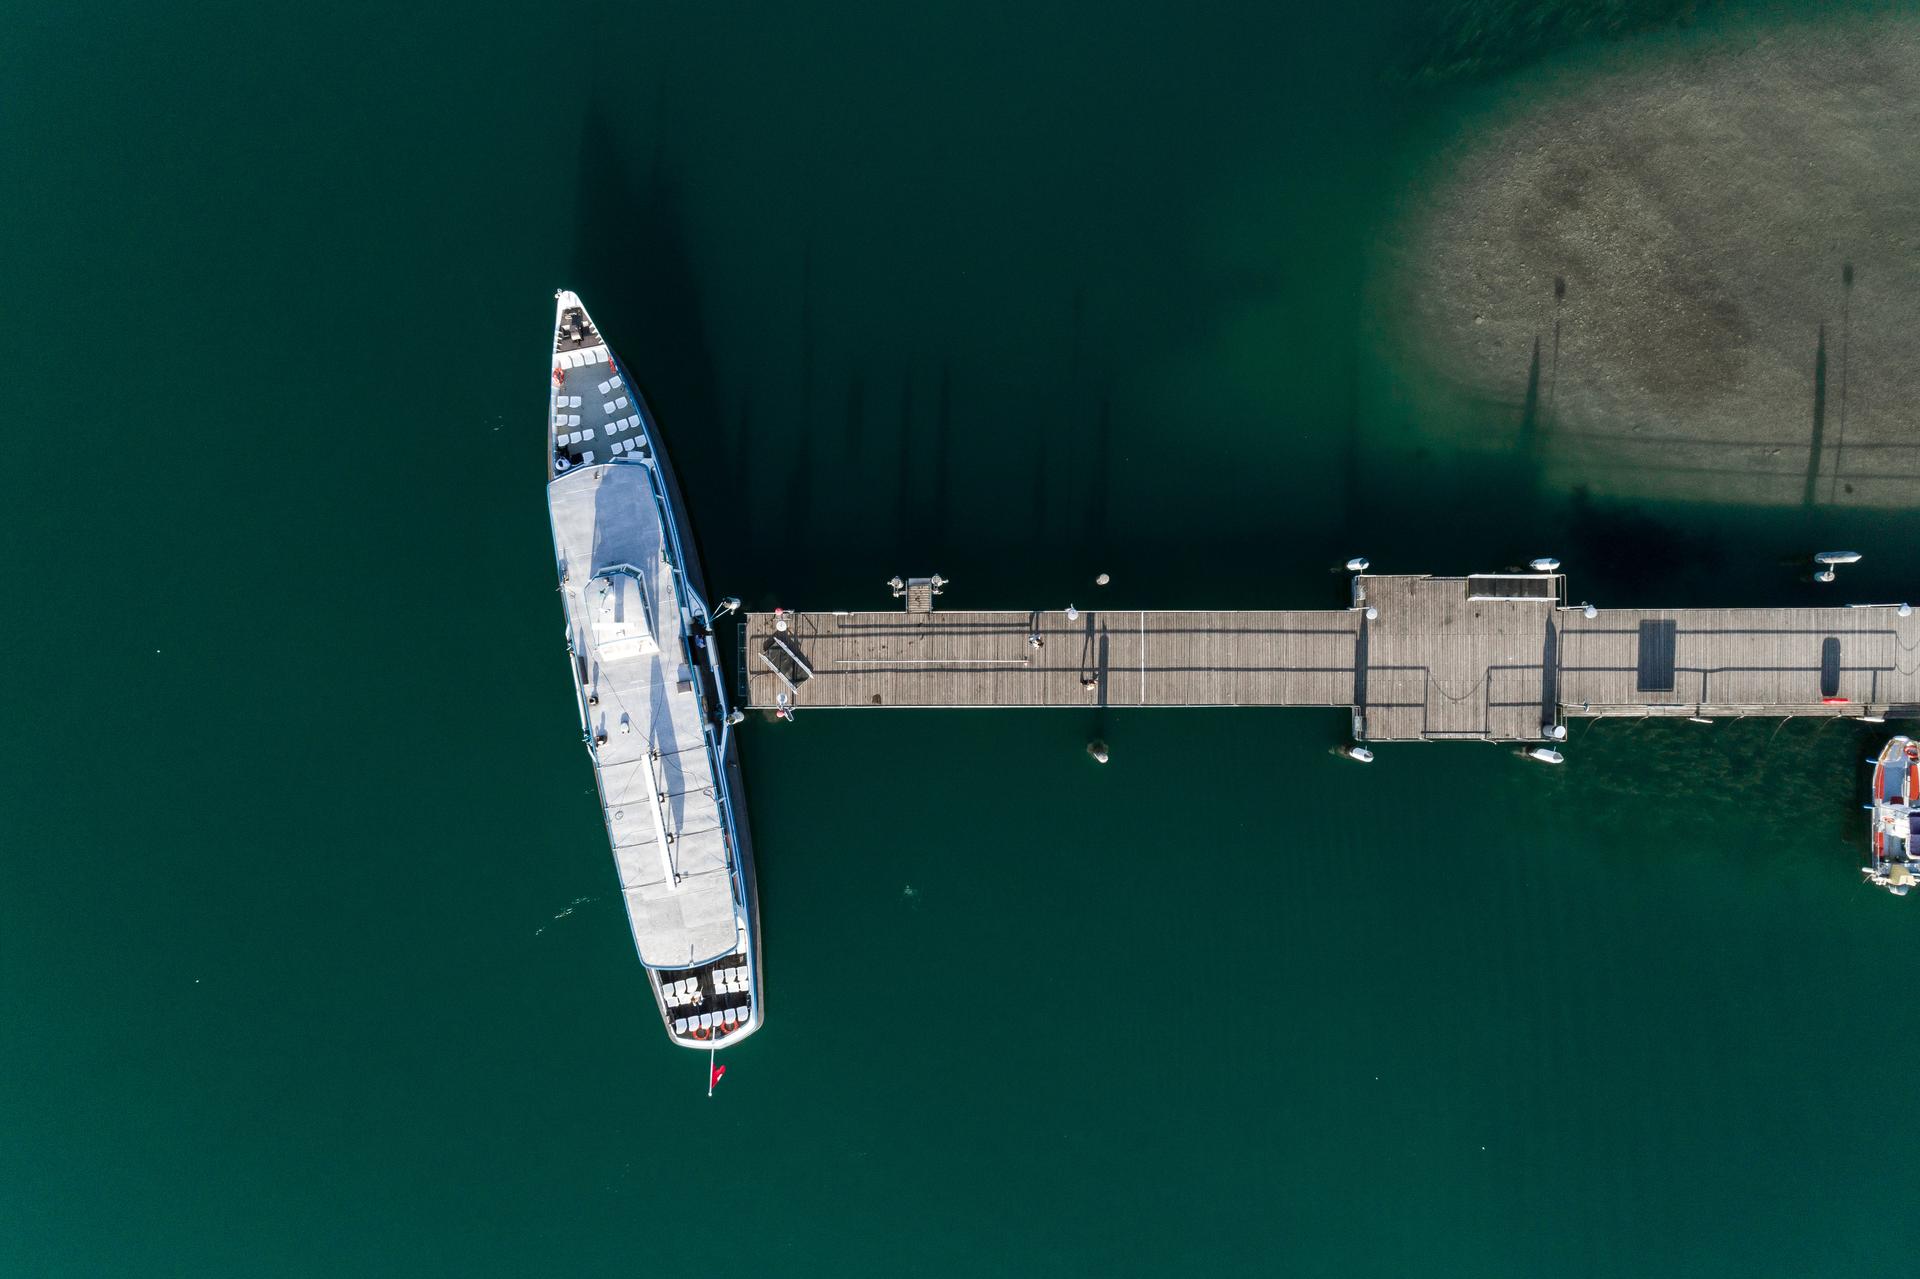 Aerial view of a ship docked at a pier, surrounded by deep green water.